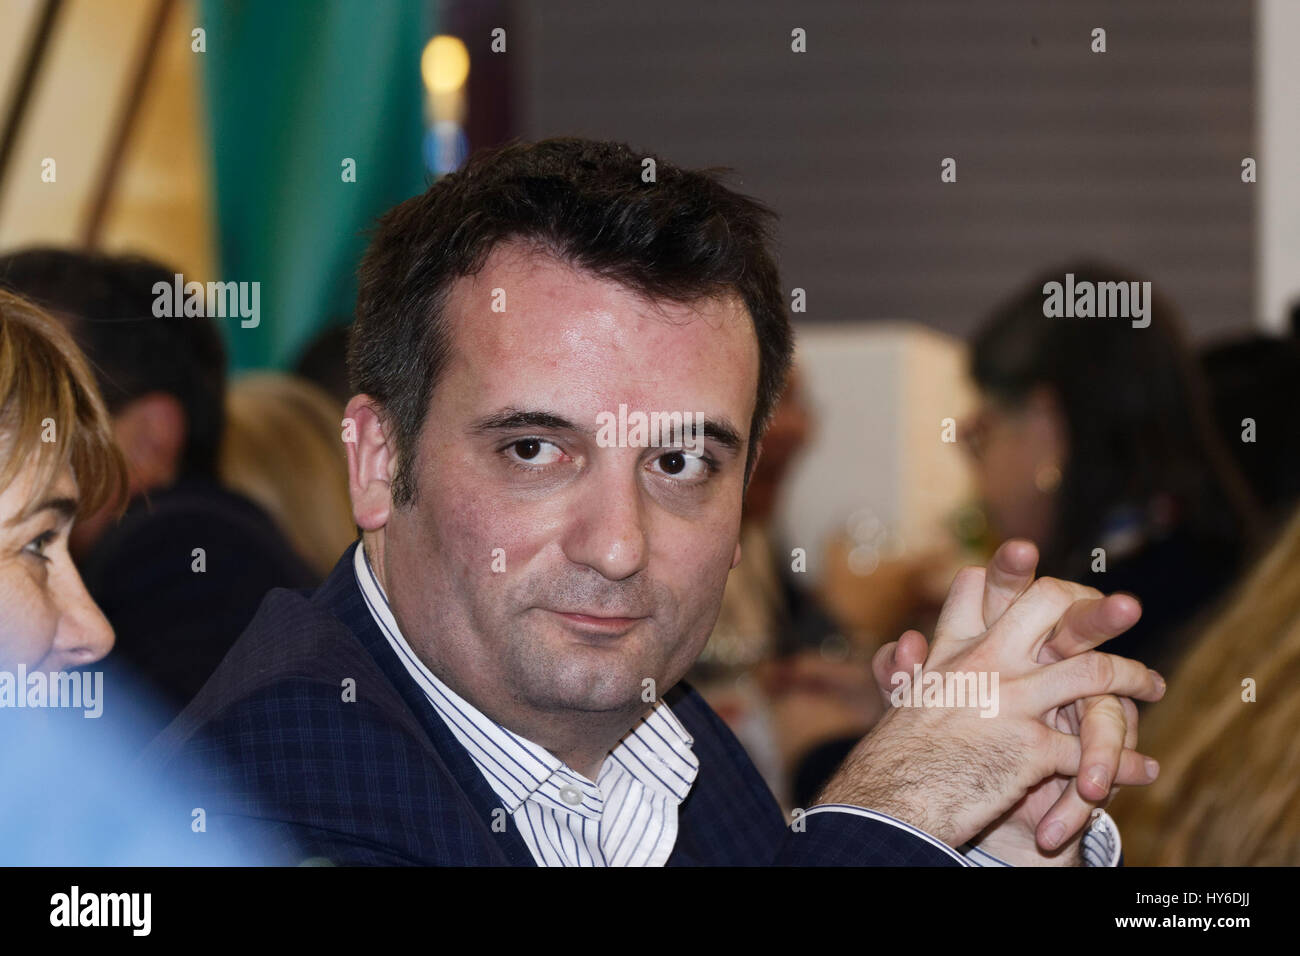 Paris,France.31th March,2017.Florian Philippot attends at theOpening evening of the Throne Fair 2017 for the benefit of the Association Petits Princes Stock Photo